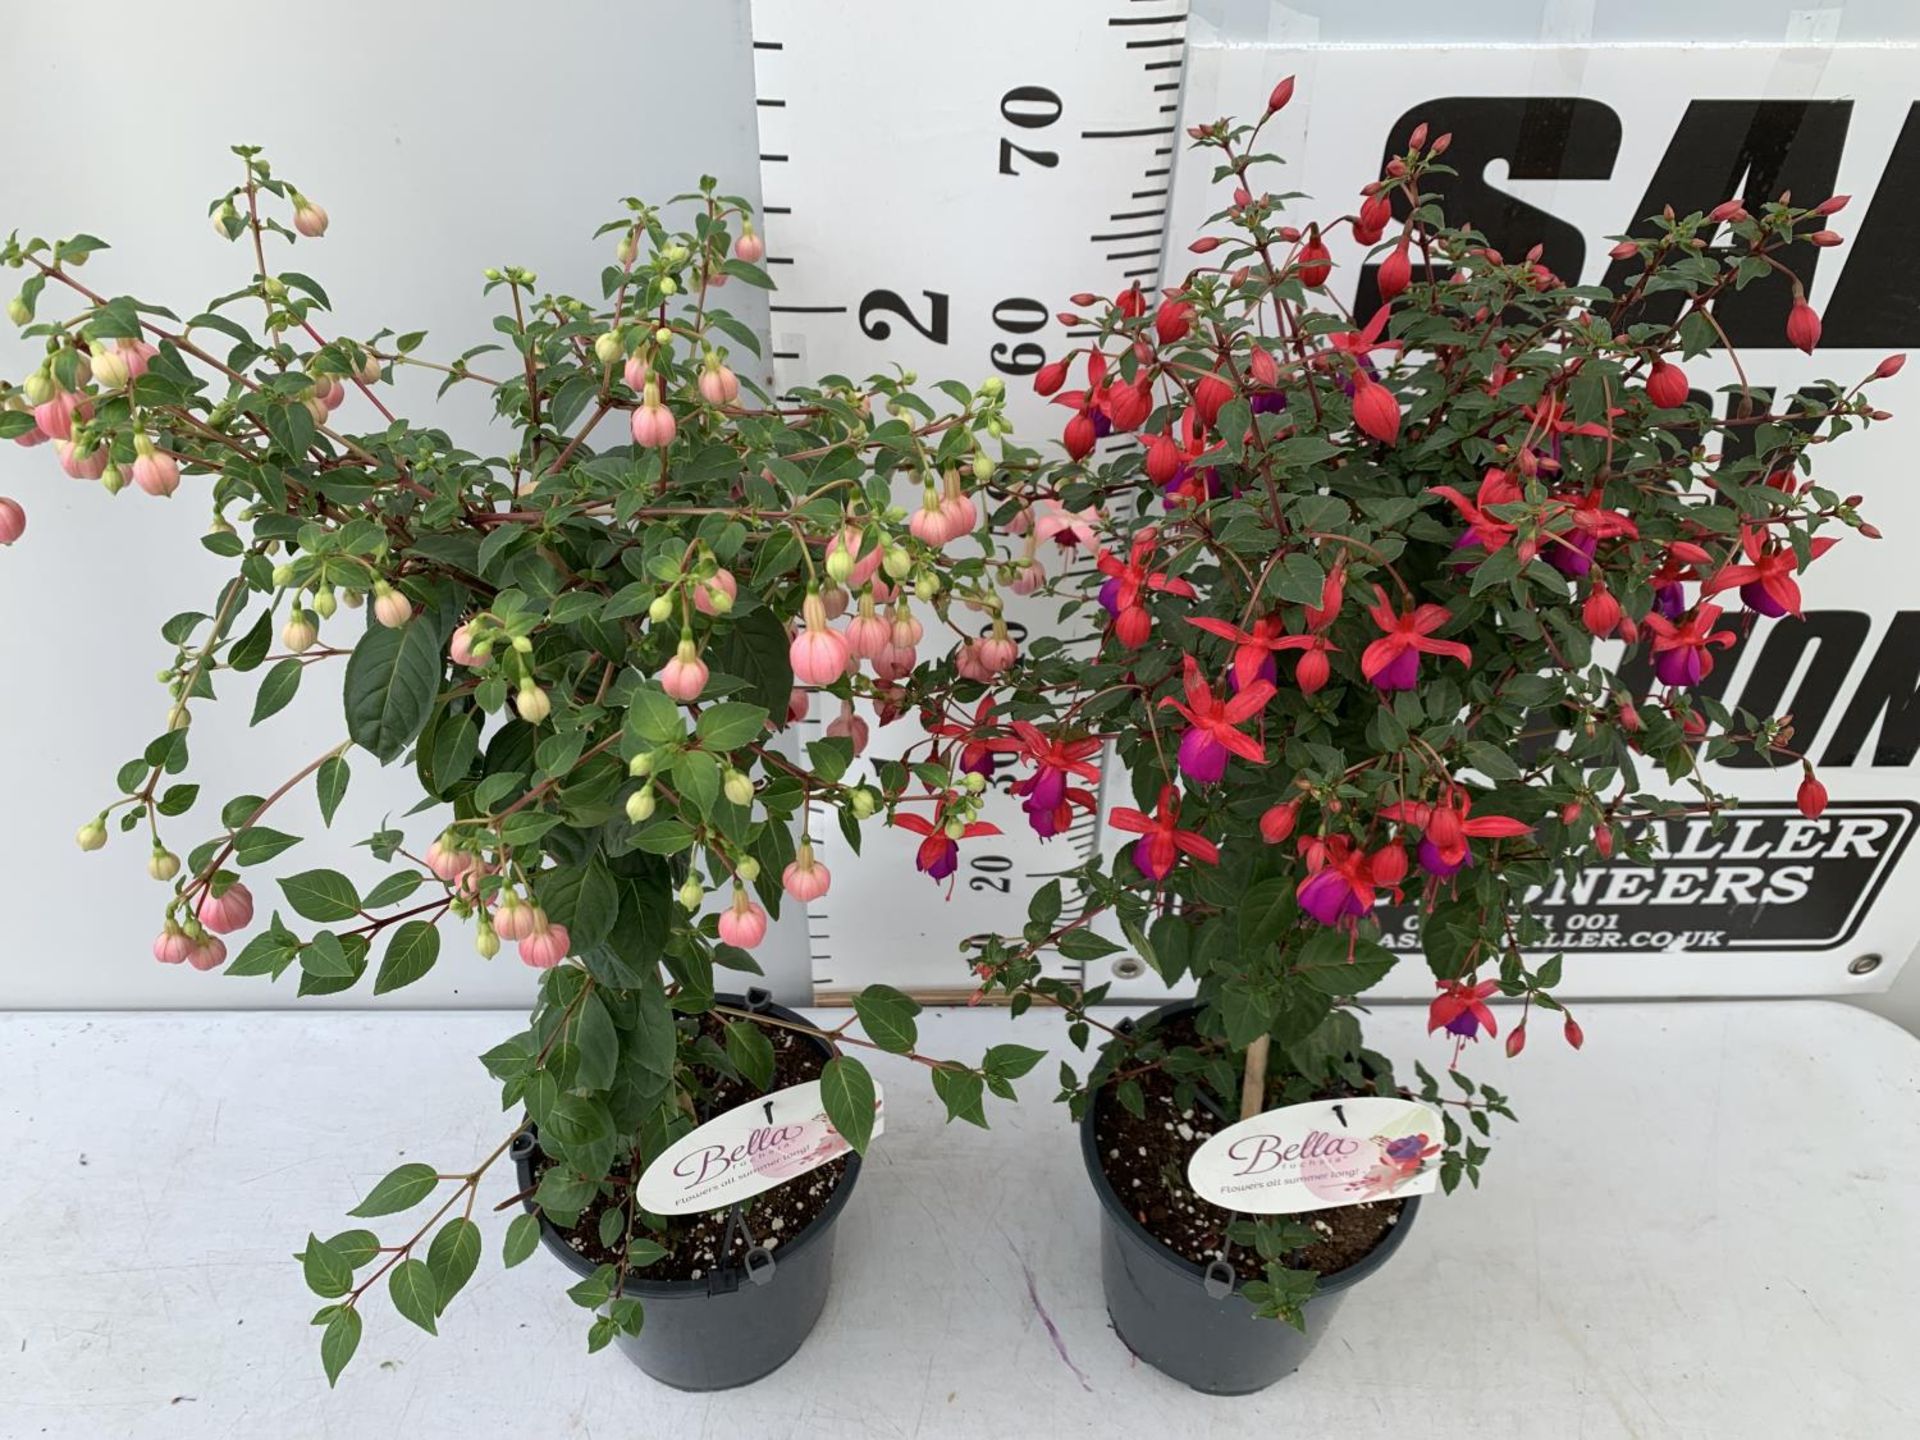 TWO BELLA STANDARD FUCHSIA IN A 3 LTR POTS 70CM -80CM TALL TO BE SOLD FOR THE TWO PLUS VAT - Image 3 of 8